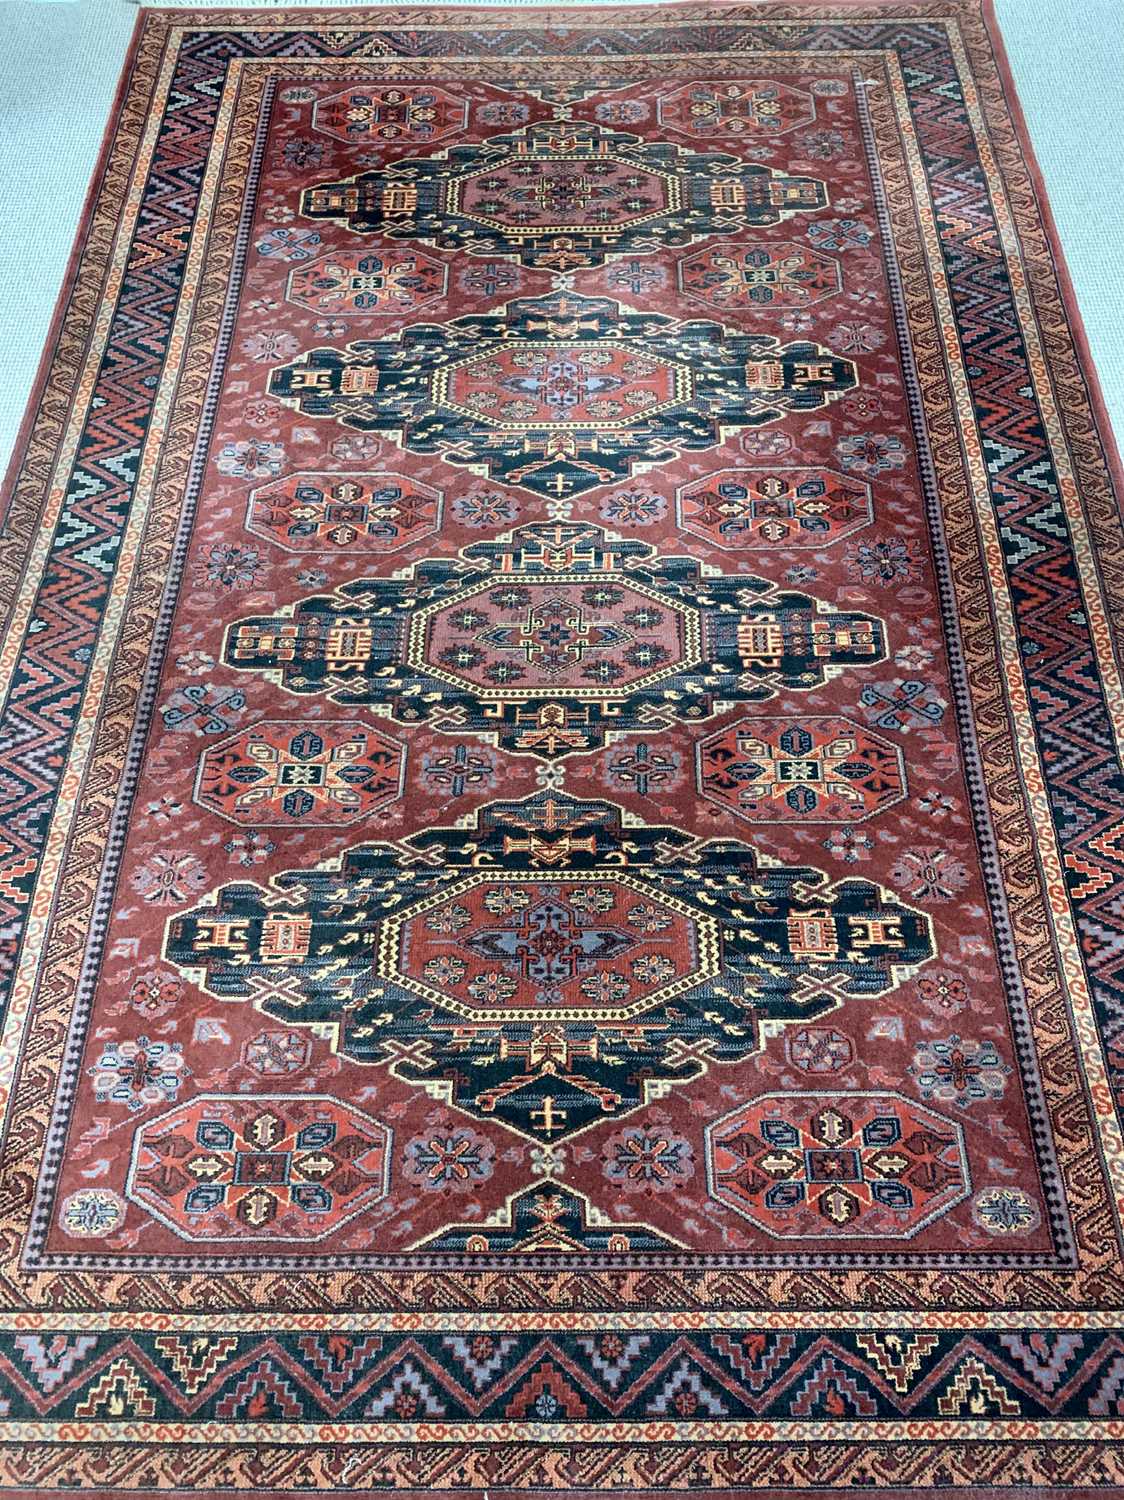 EASTERN WOOLLEN RUG - red ground with multiple zig zag pattern border and four central diamonds